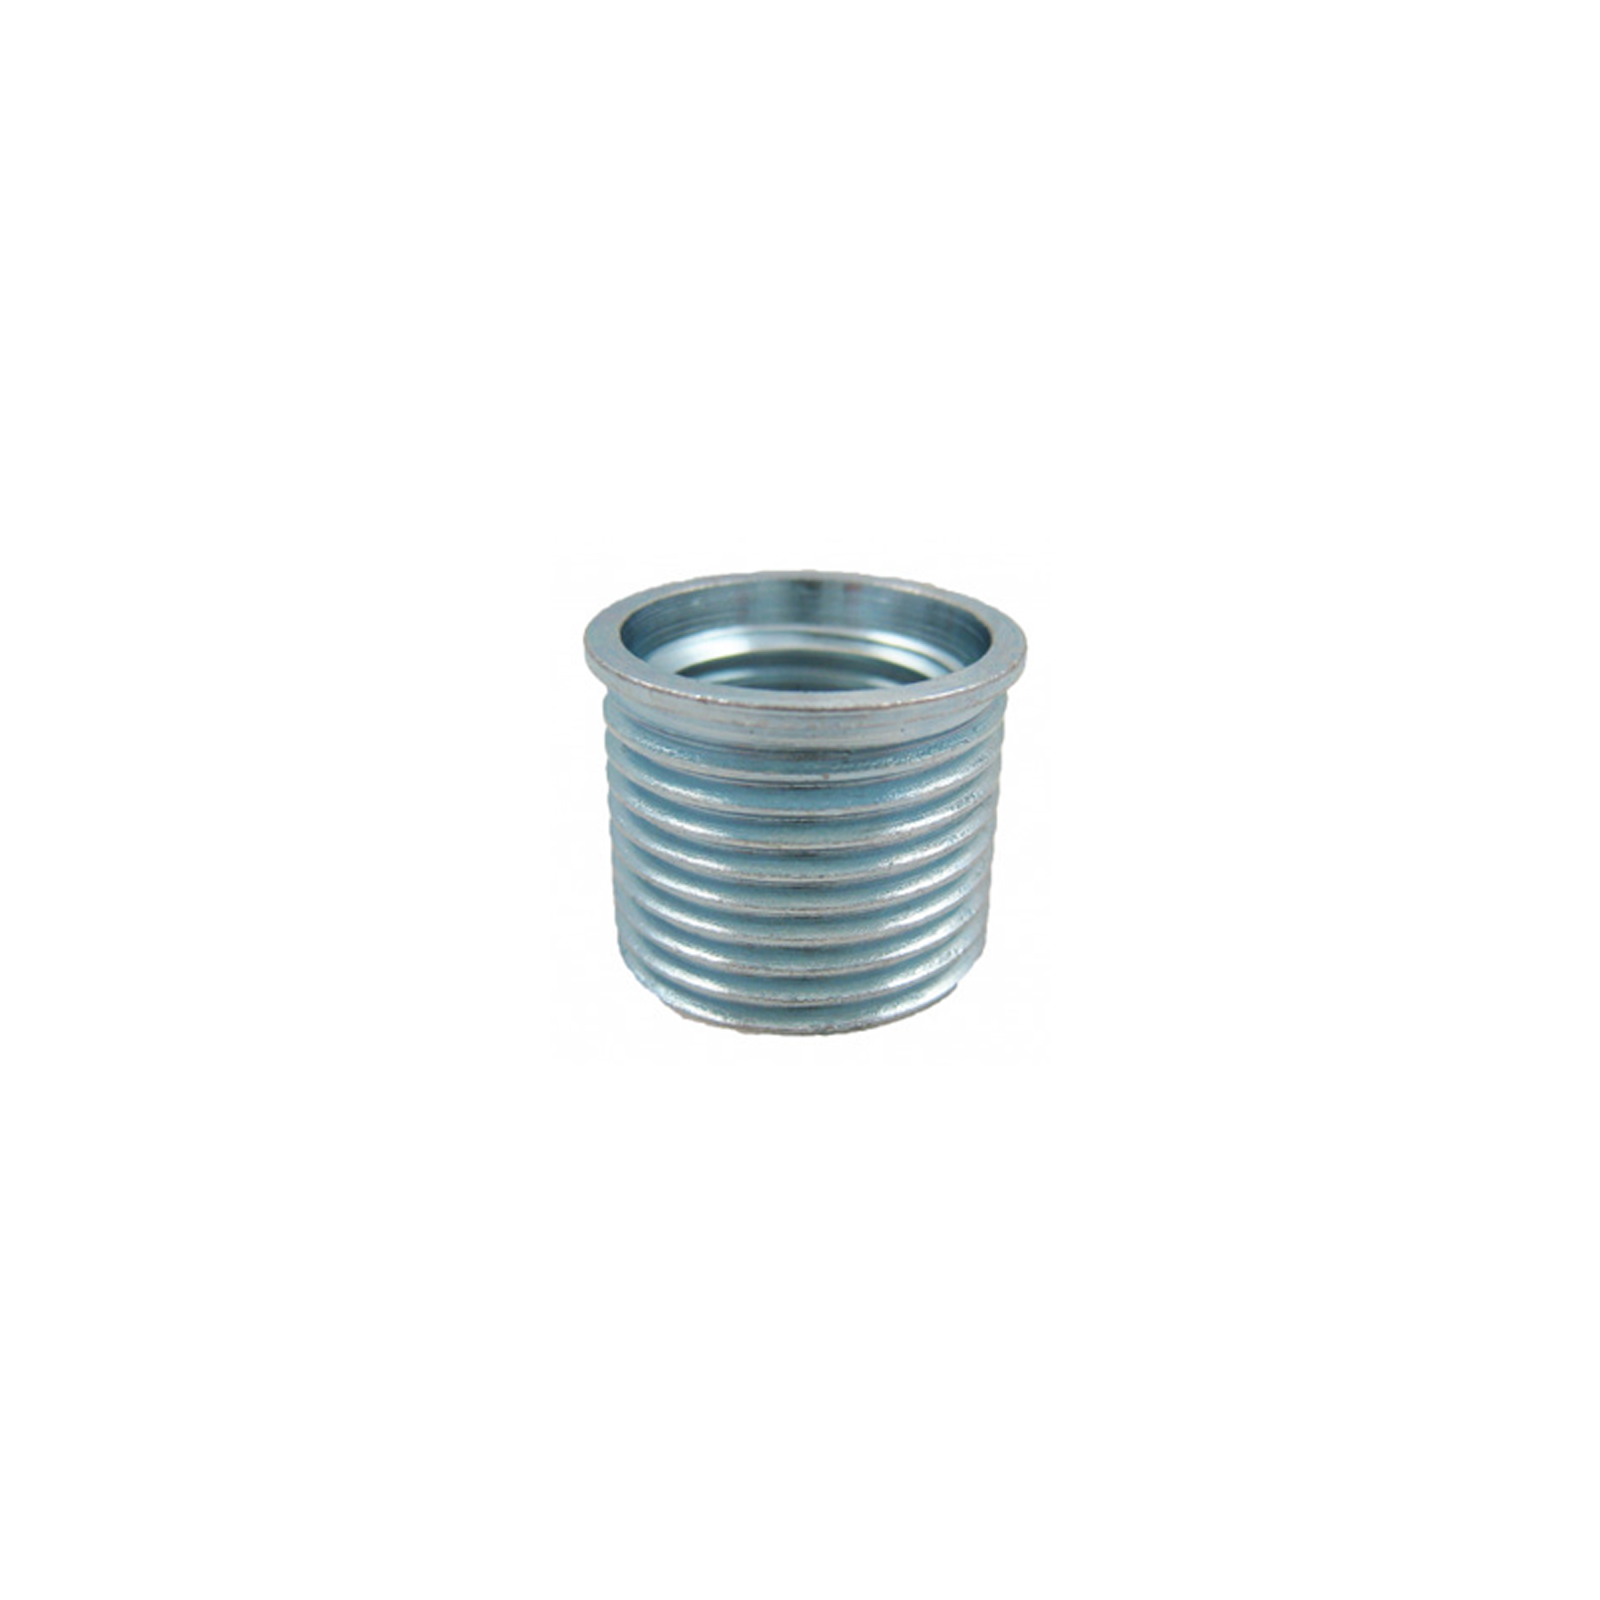 inch-sae-o-ring-carbon-steel-inserts-01